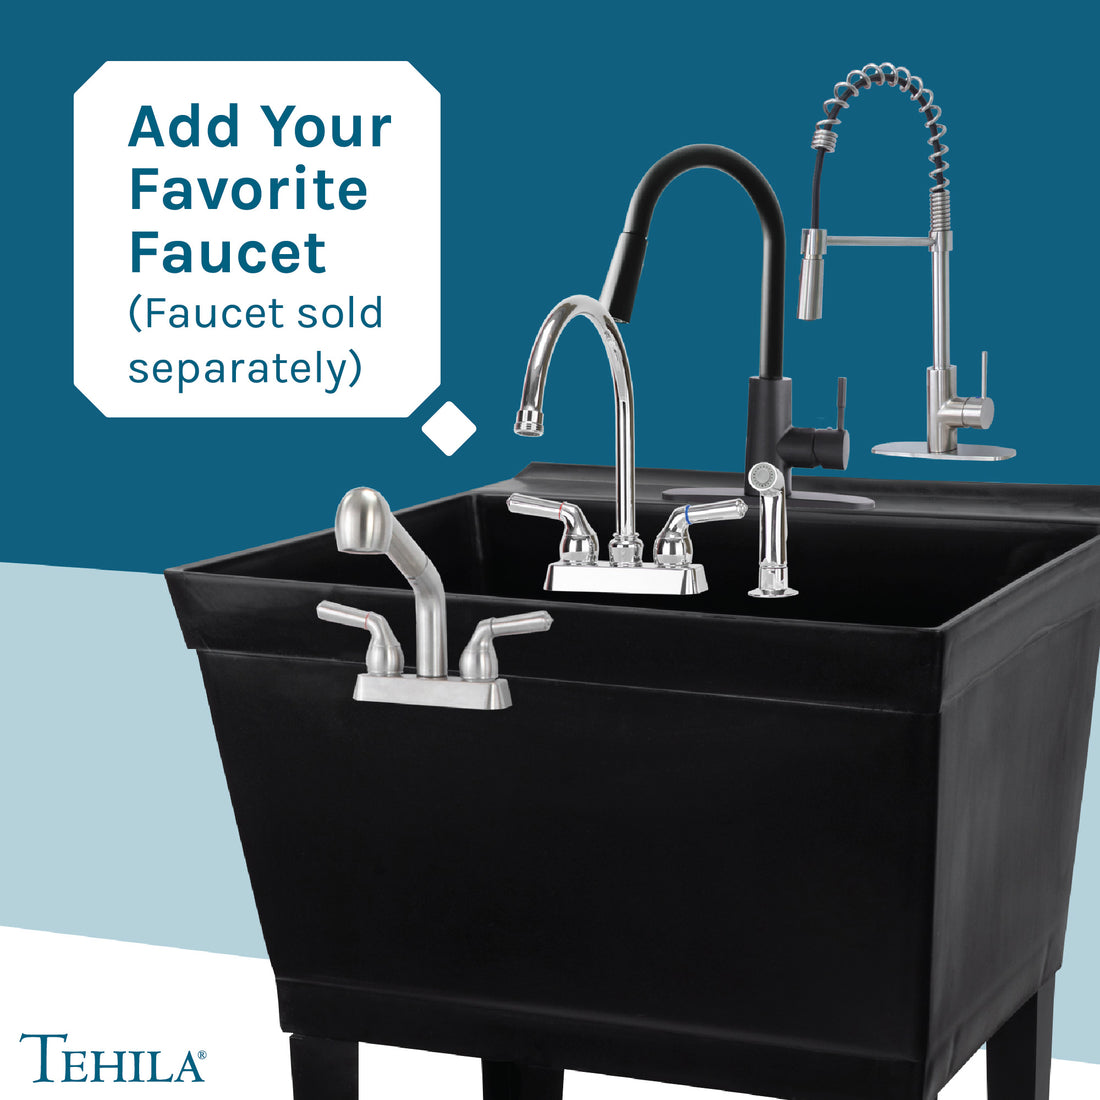 Black Standard Utility Sinks Add Your Favorite Faucet (Faucet Sold Separately)